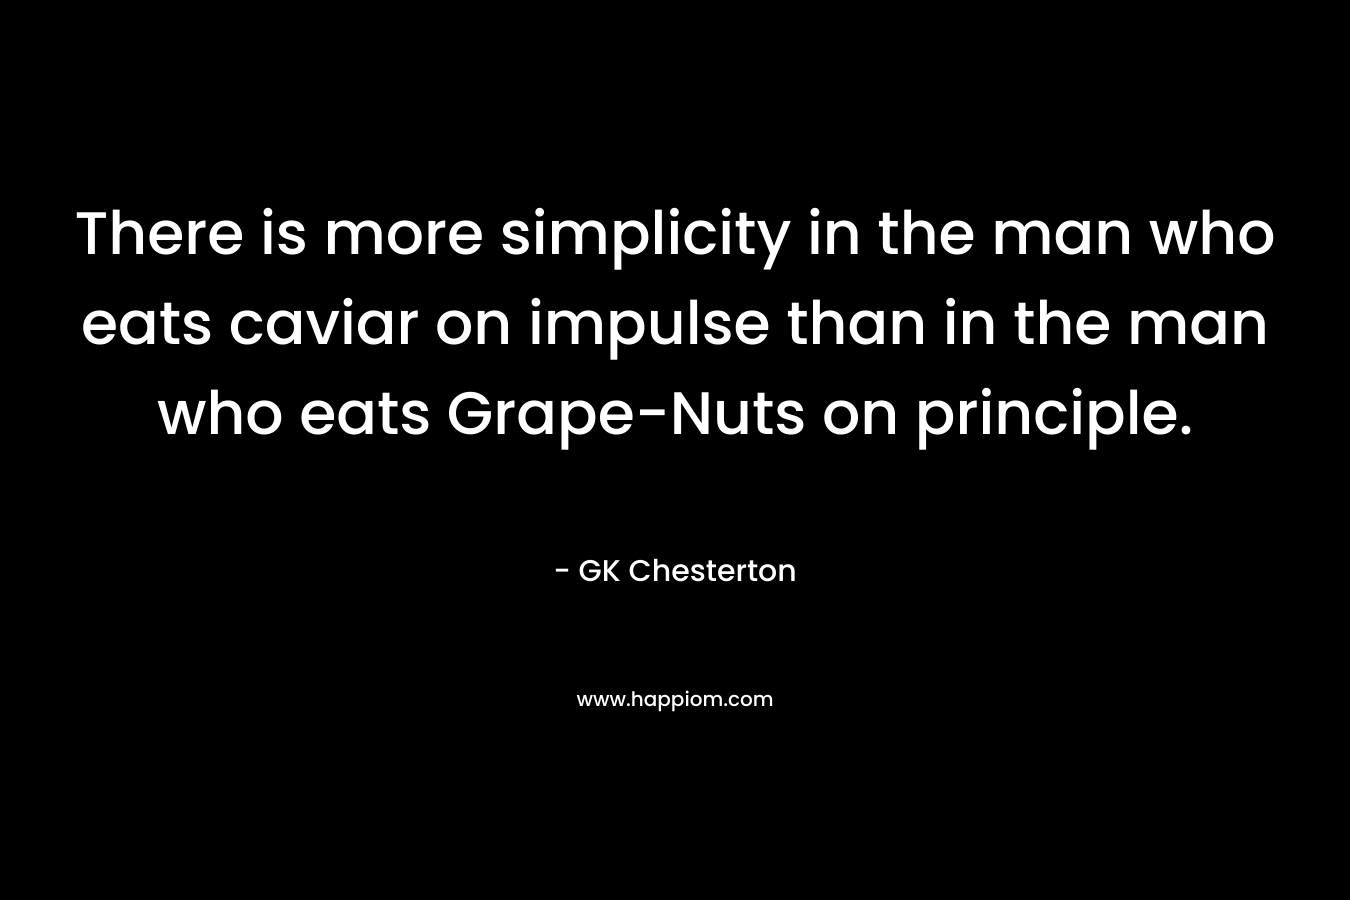 There is more simplicity in the man who eats caviar on impulse than in the man who eats Grape-Nuts on principle. – GK Chesterton